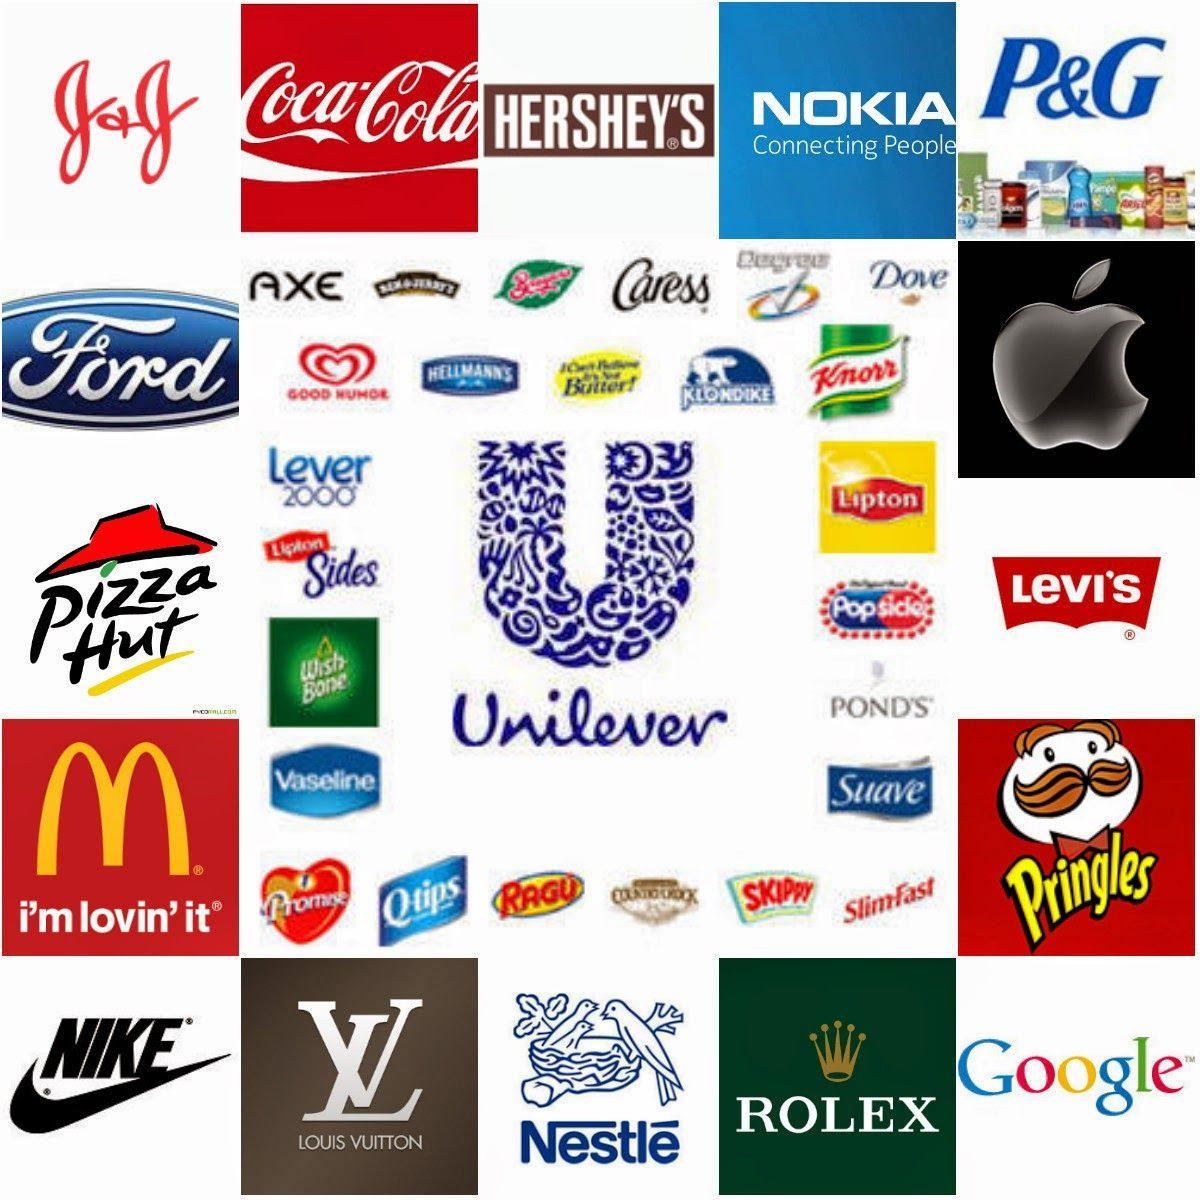 Best Branding Logo - Amazing Collage Brand Logos Images With Names | Brand Logos Pictures ...